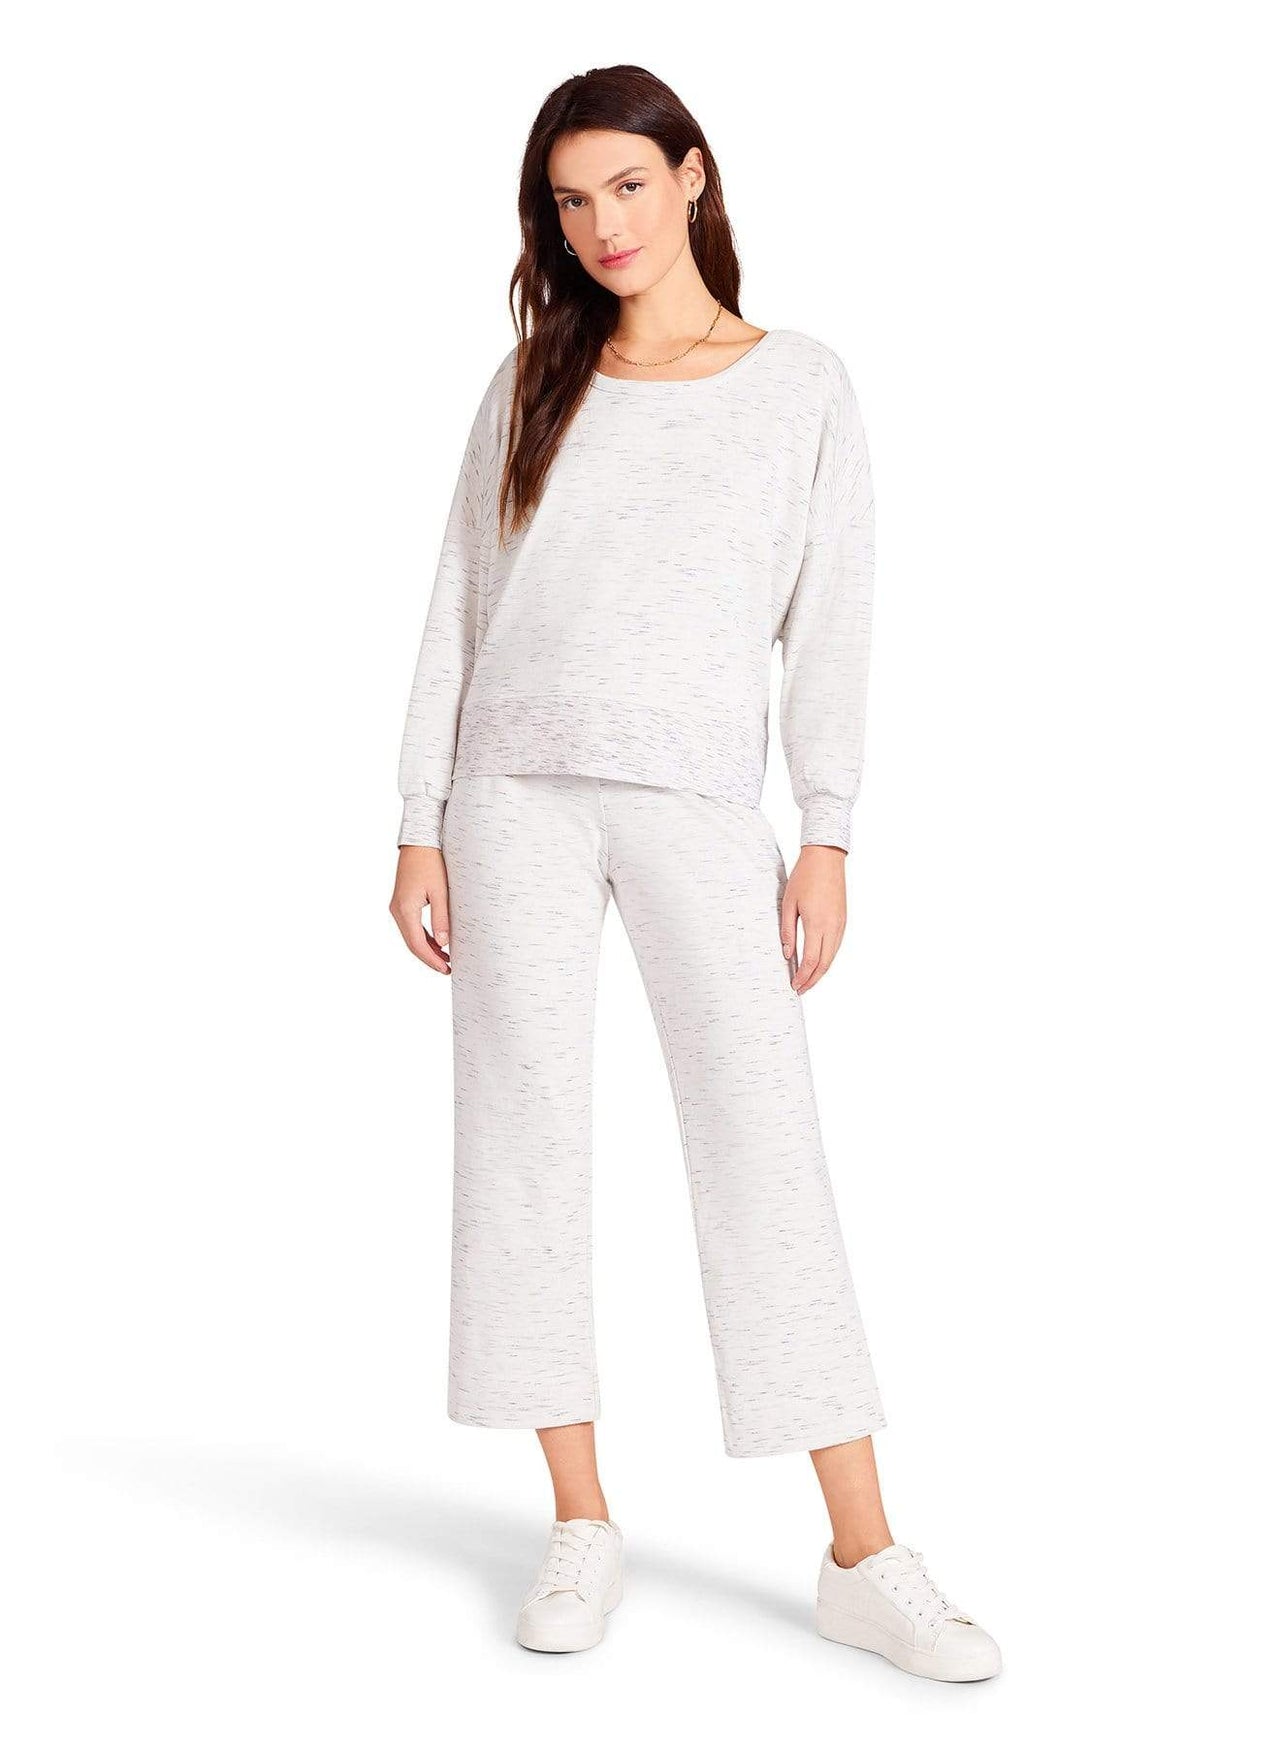 See If I Flare Pant Oatmeal, Sweatpant Bottom by Steve Madden | LIT Boutique